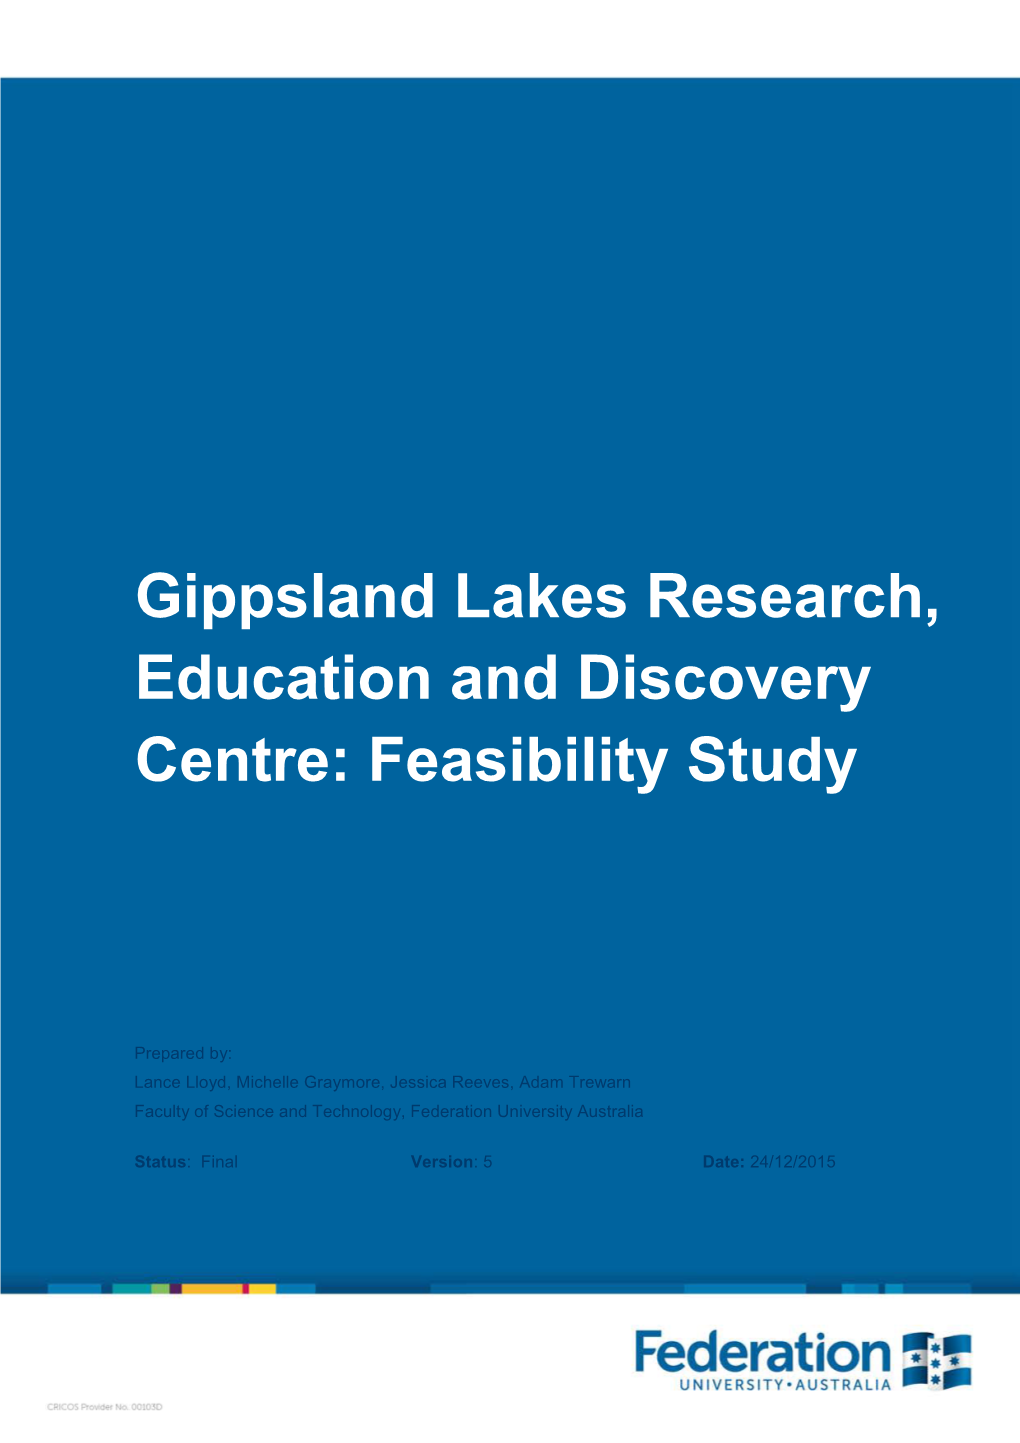 Gippsland Lakes Research, Education and Discovery Centre: Feasibility Study